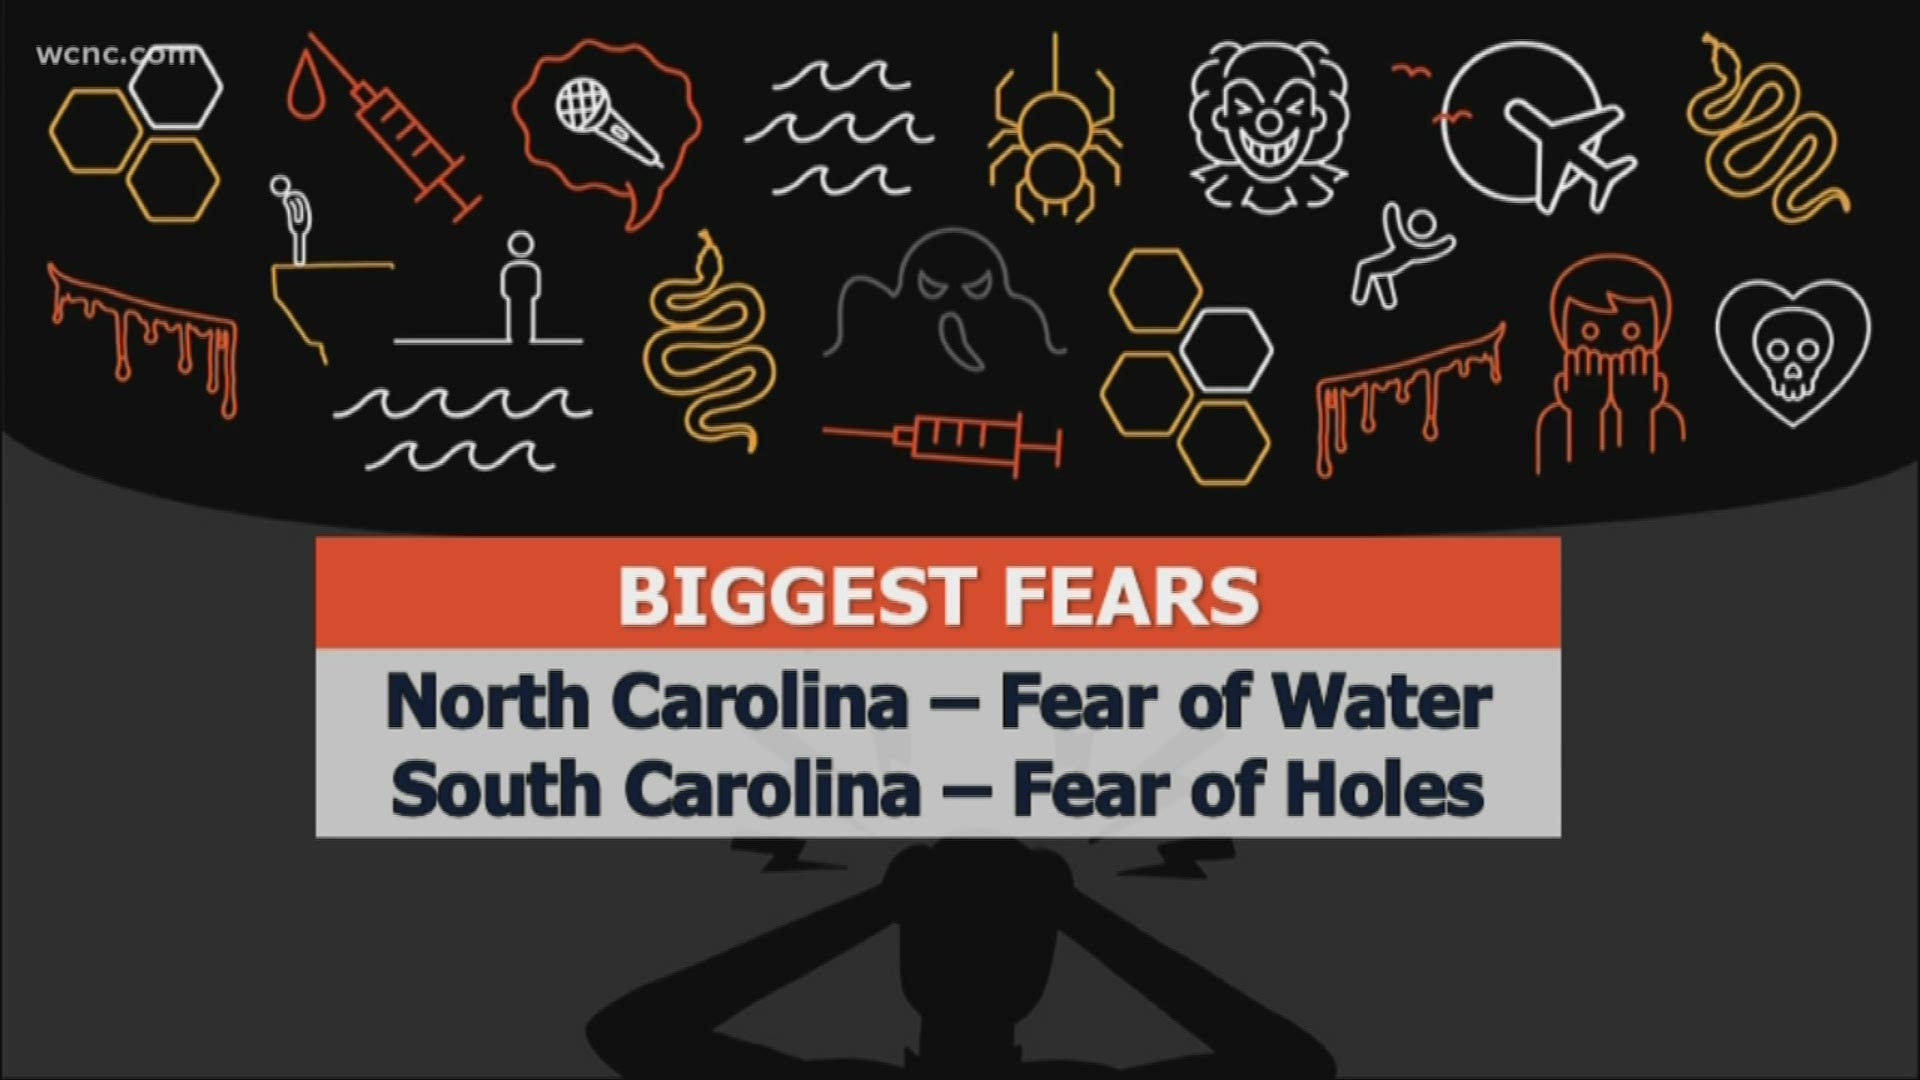 What is your biggest fear? A new study from a home security company found the top searched phobias in each state.